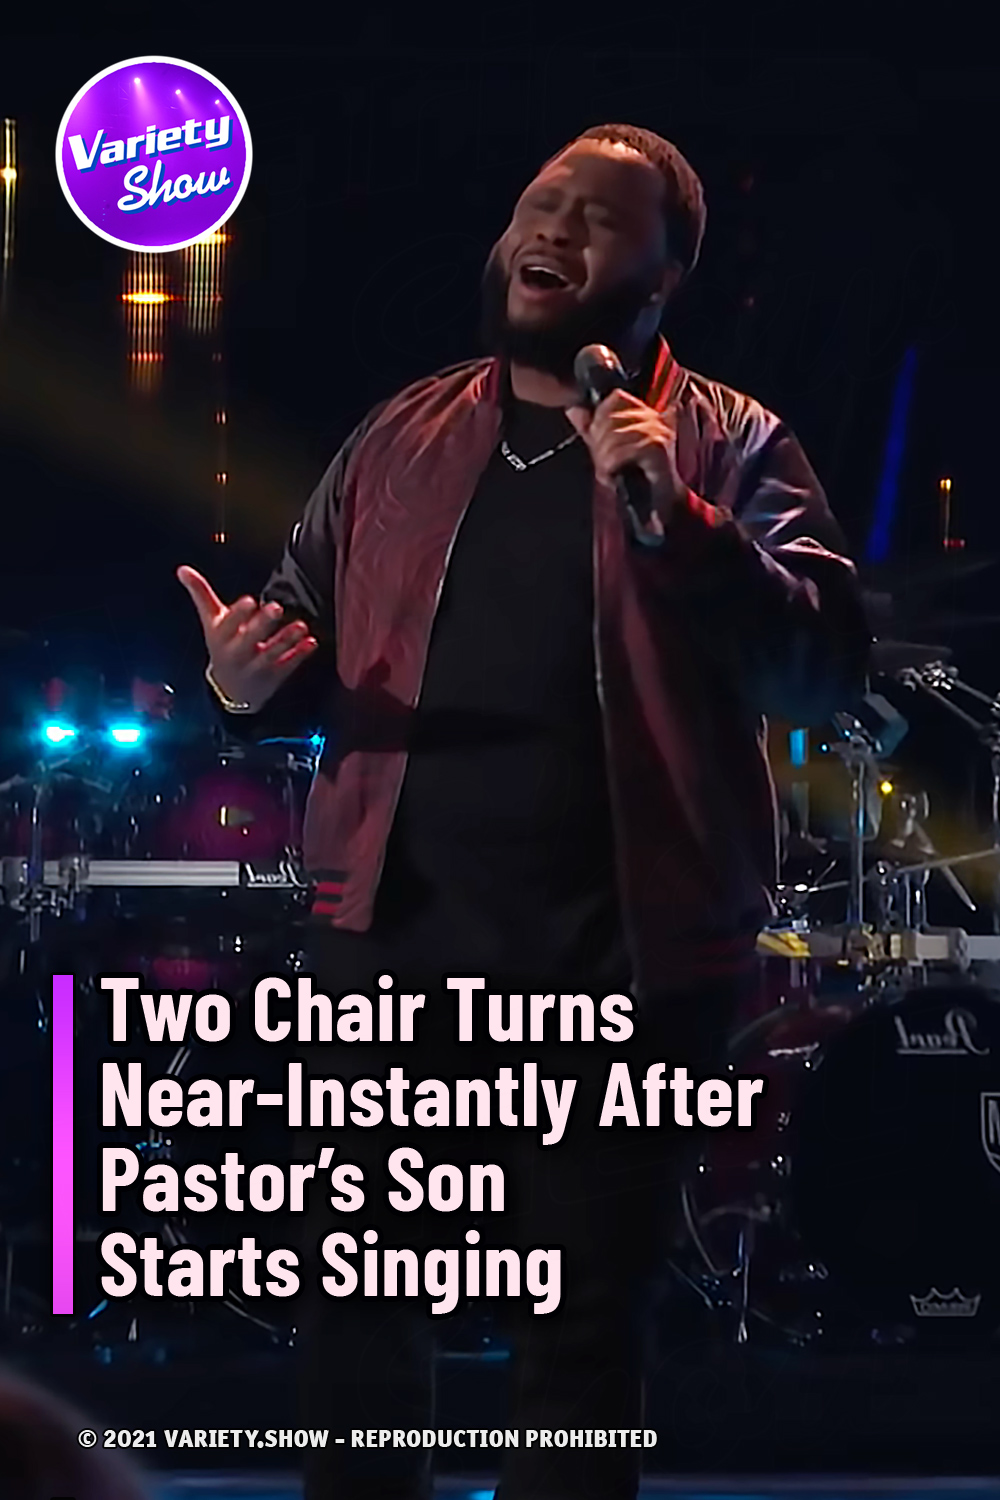 Two Chair Turns Near-Instantly After Pastor’s Son Starts Singing